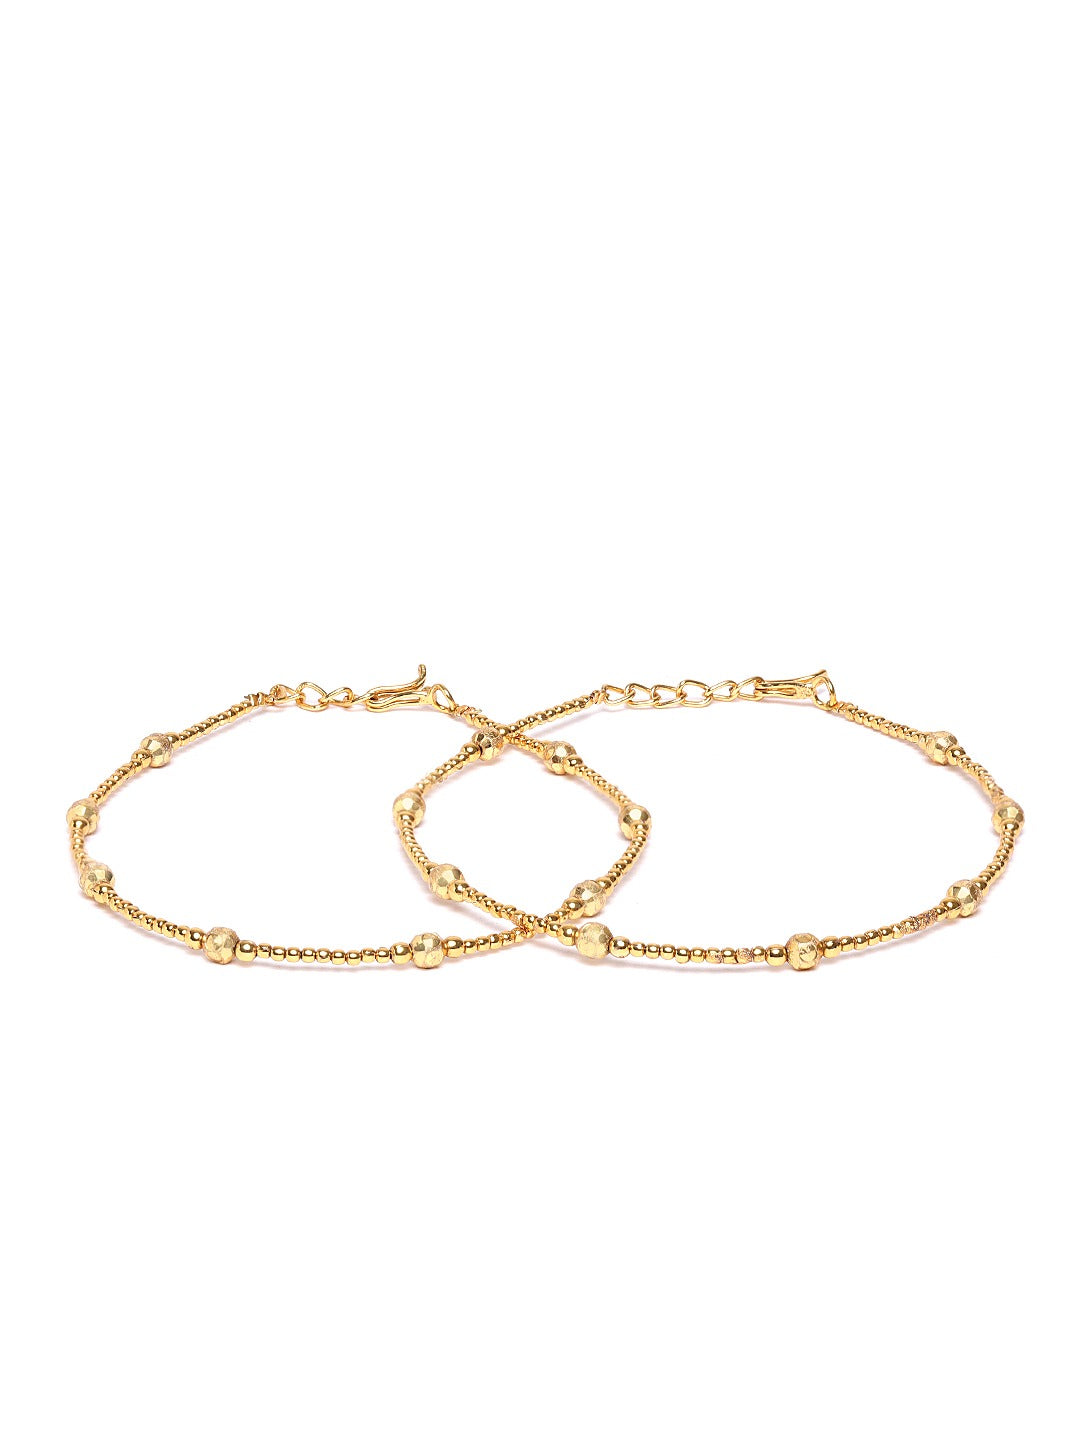 Set of 2 Gold Plated Anklets with Beads